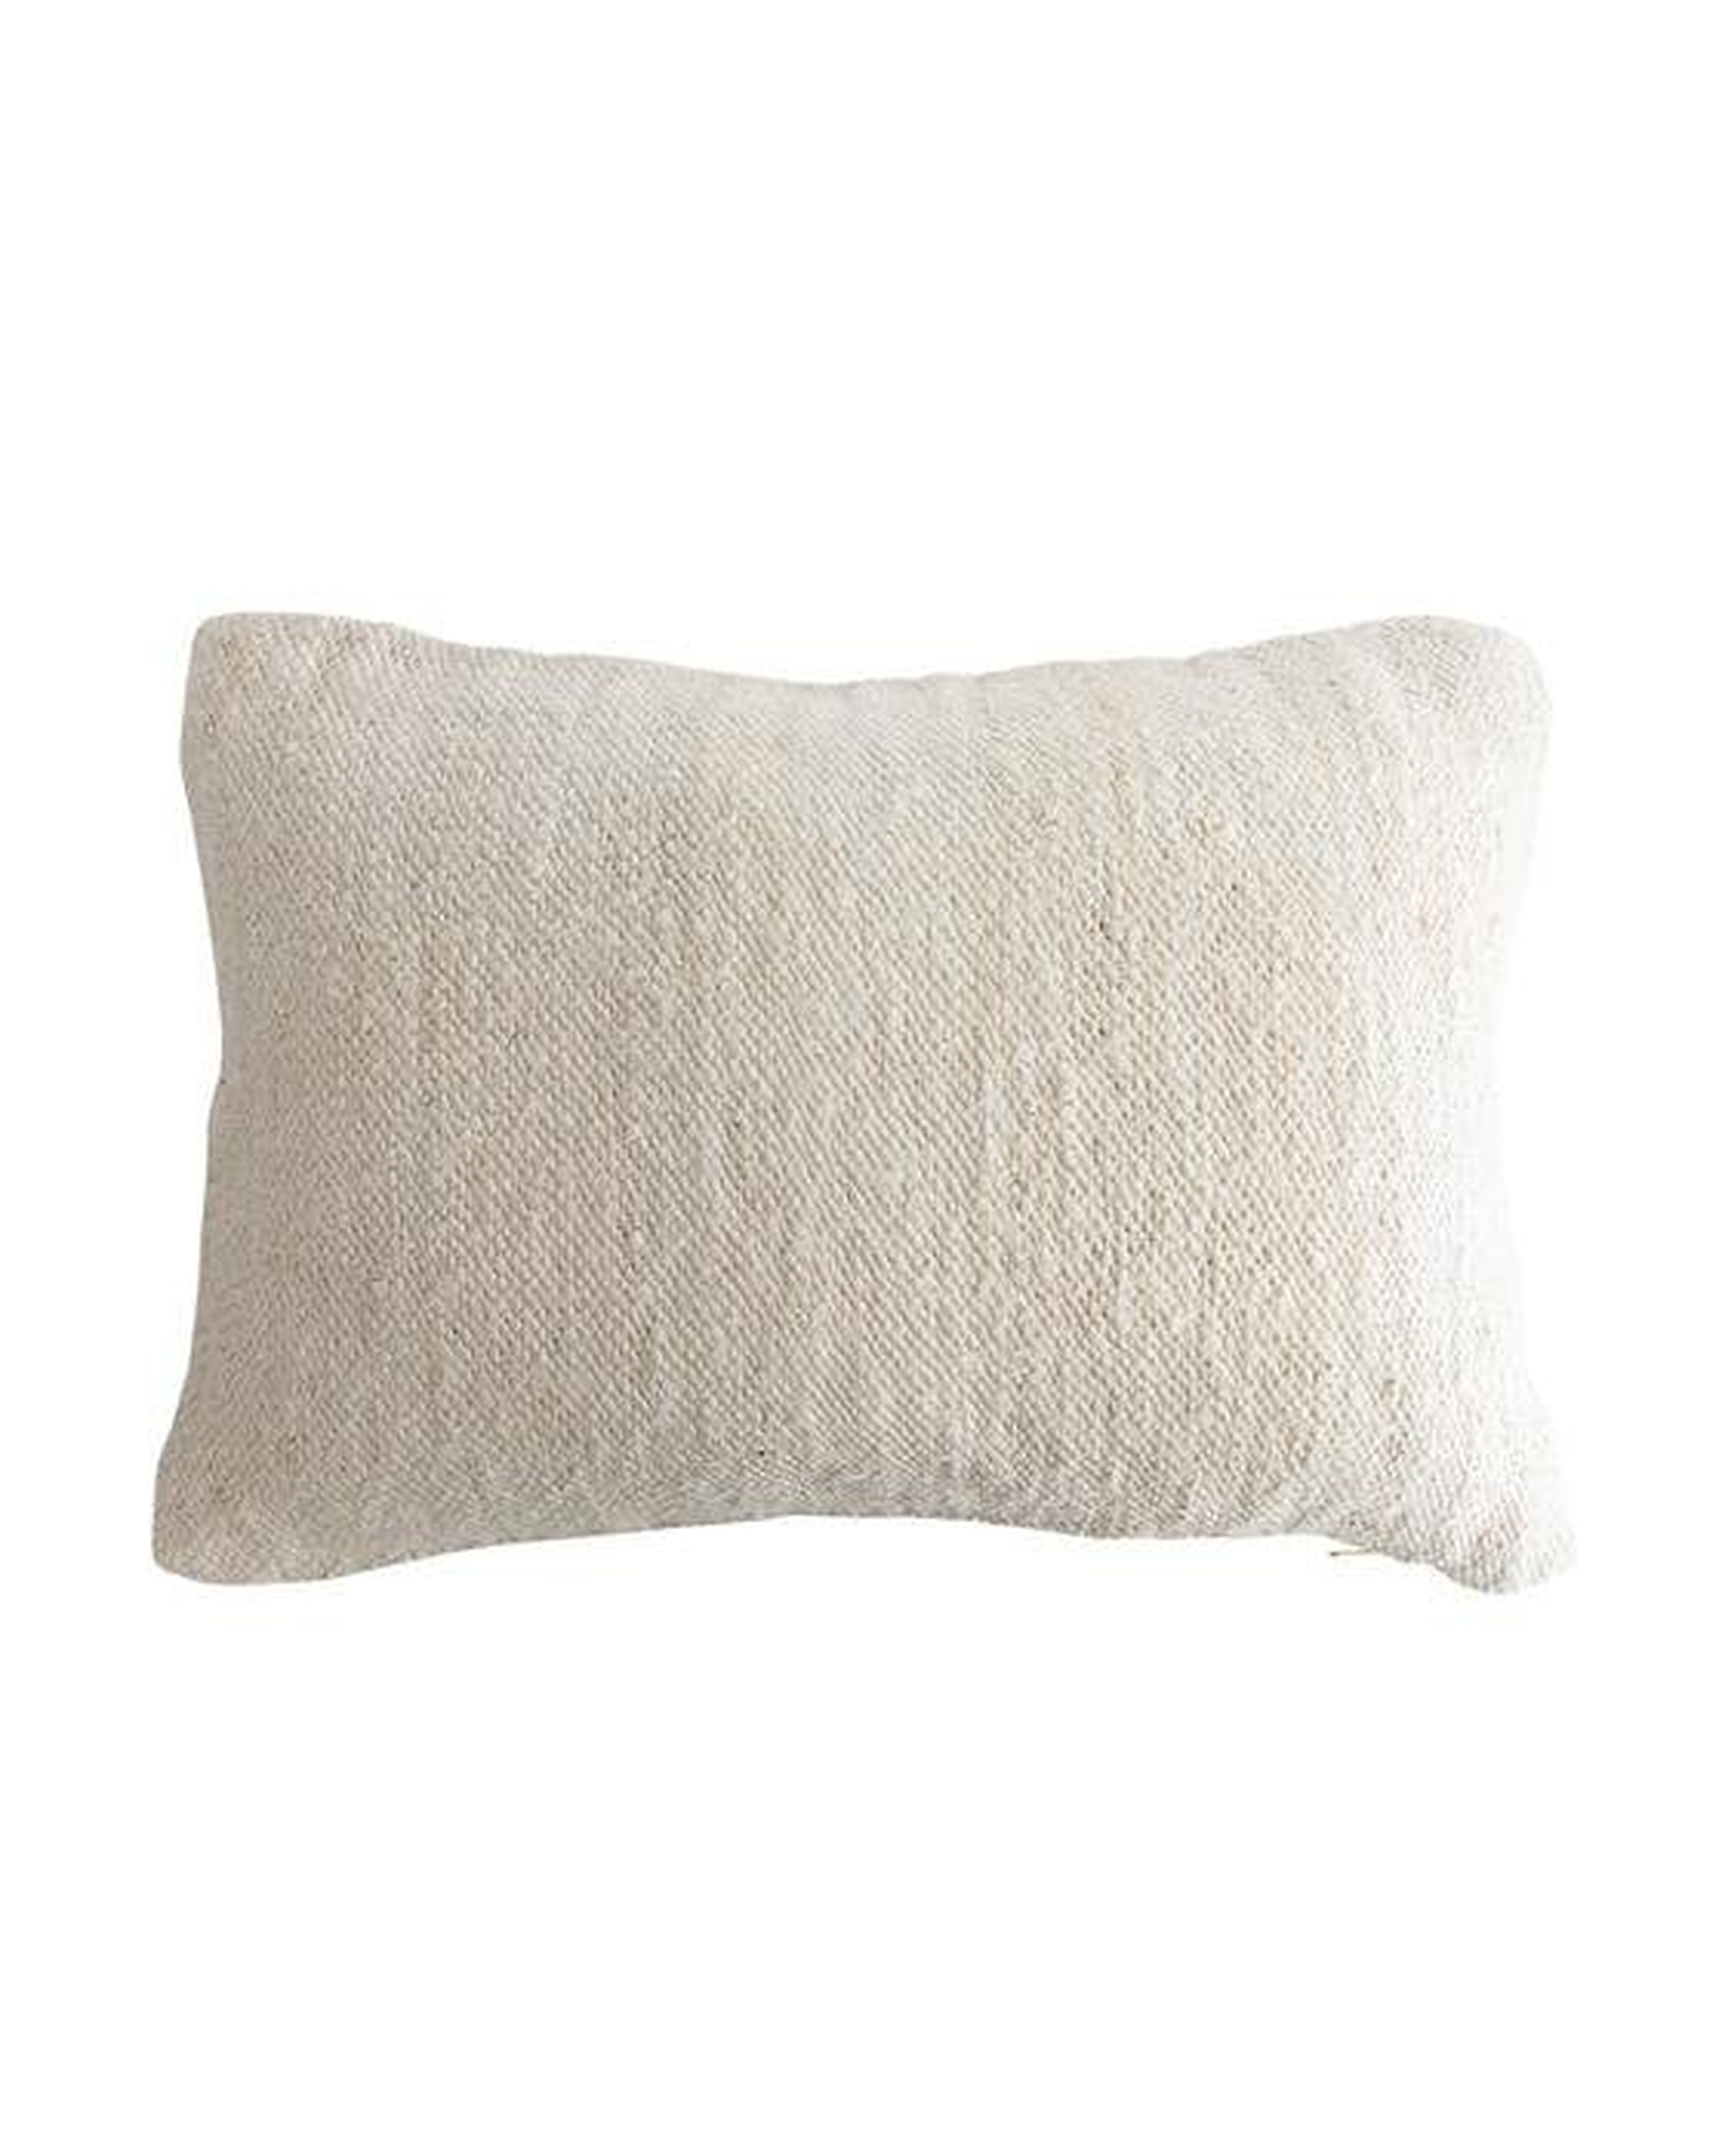 Tari Pillow Cover Only, 20" x 14" - McGee & Co.